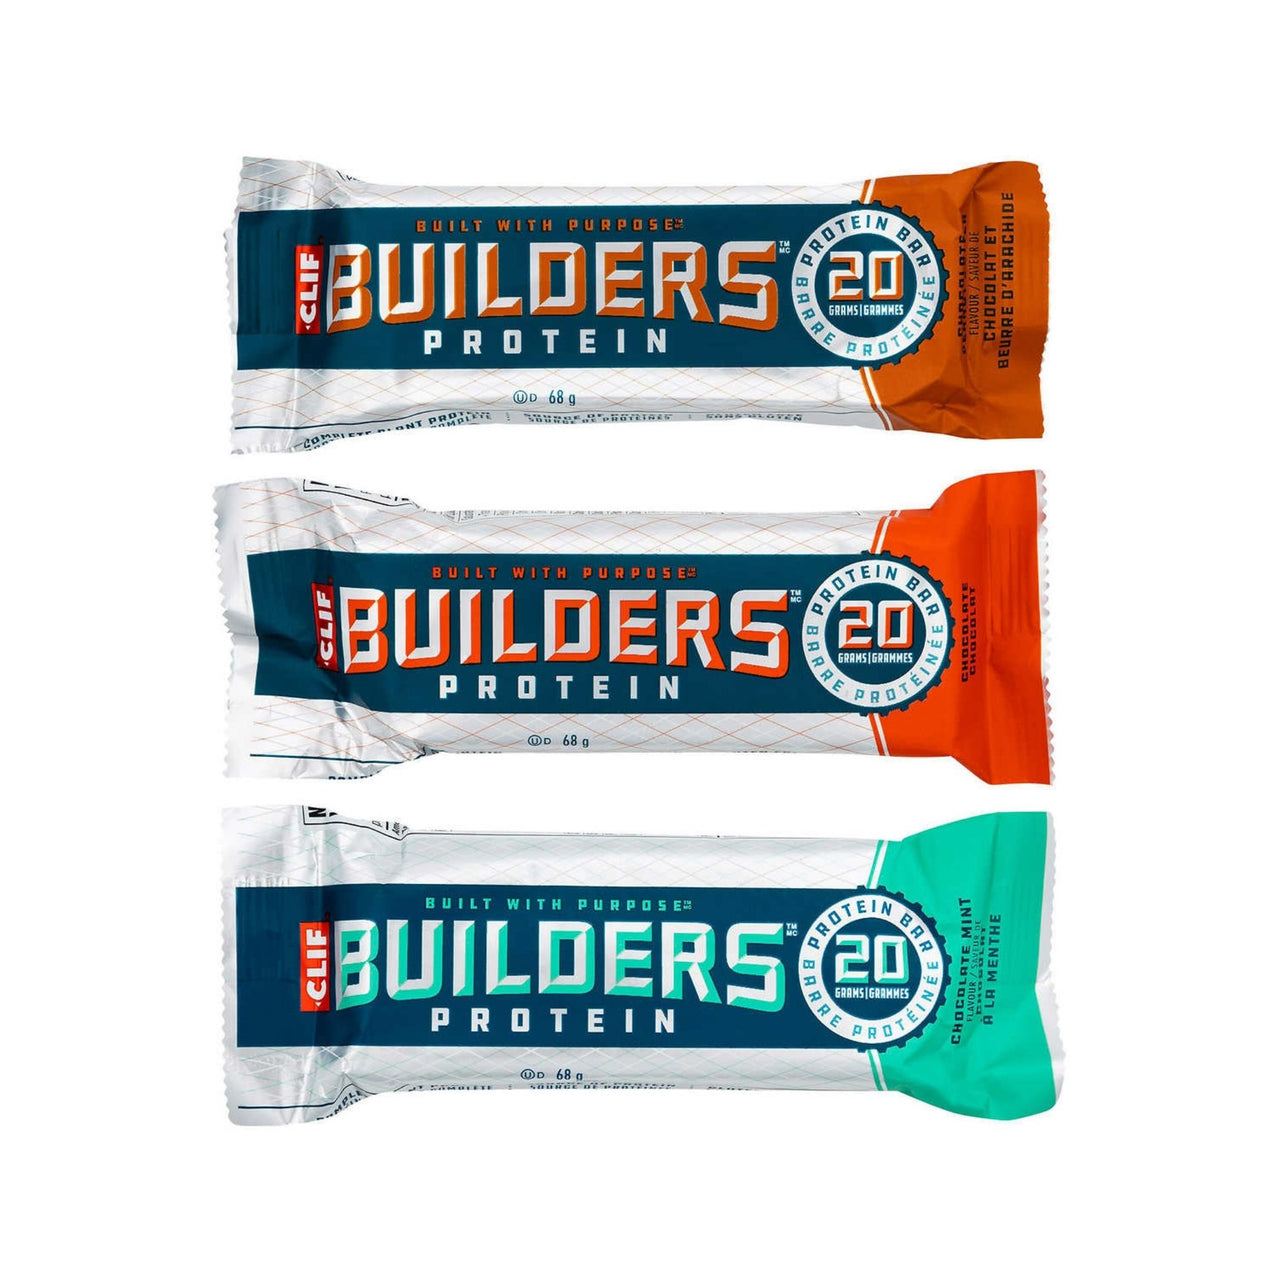 Image of Clif Bar Builders Protein Bars